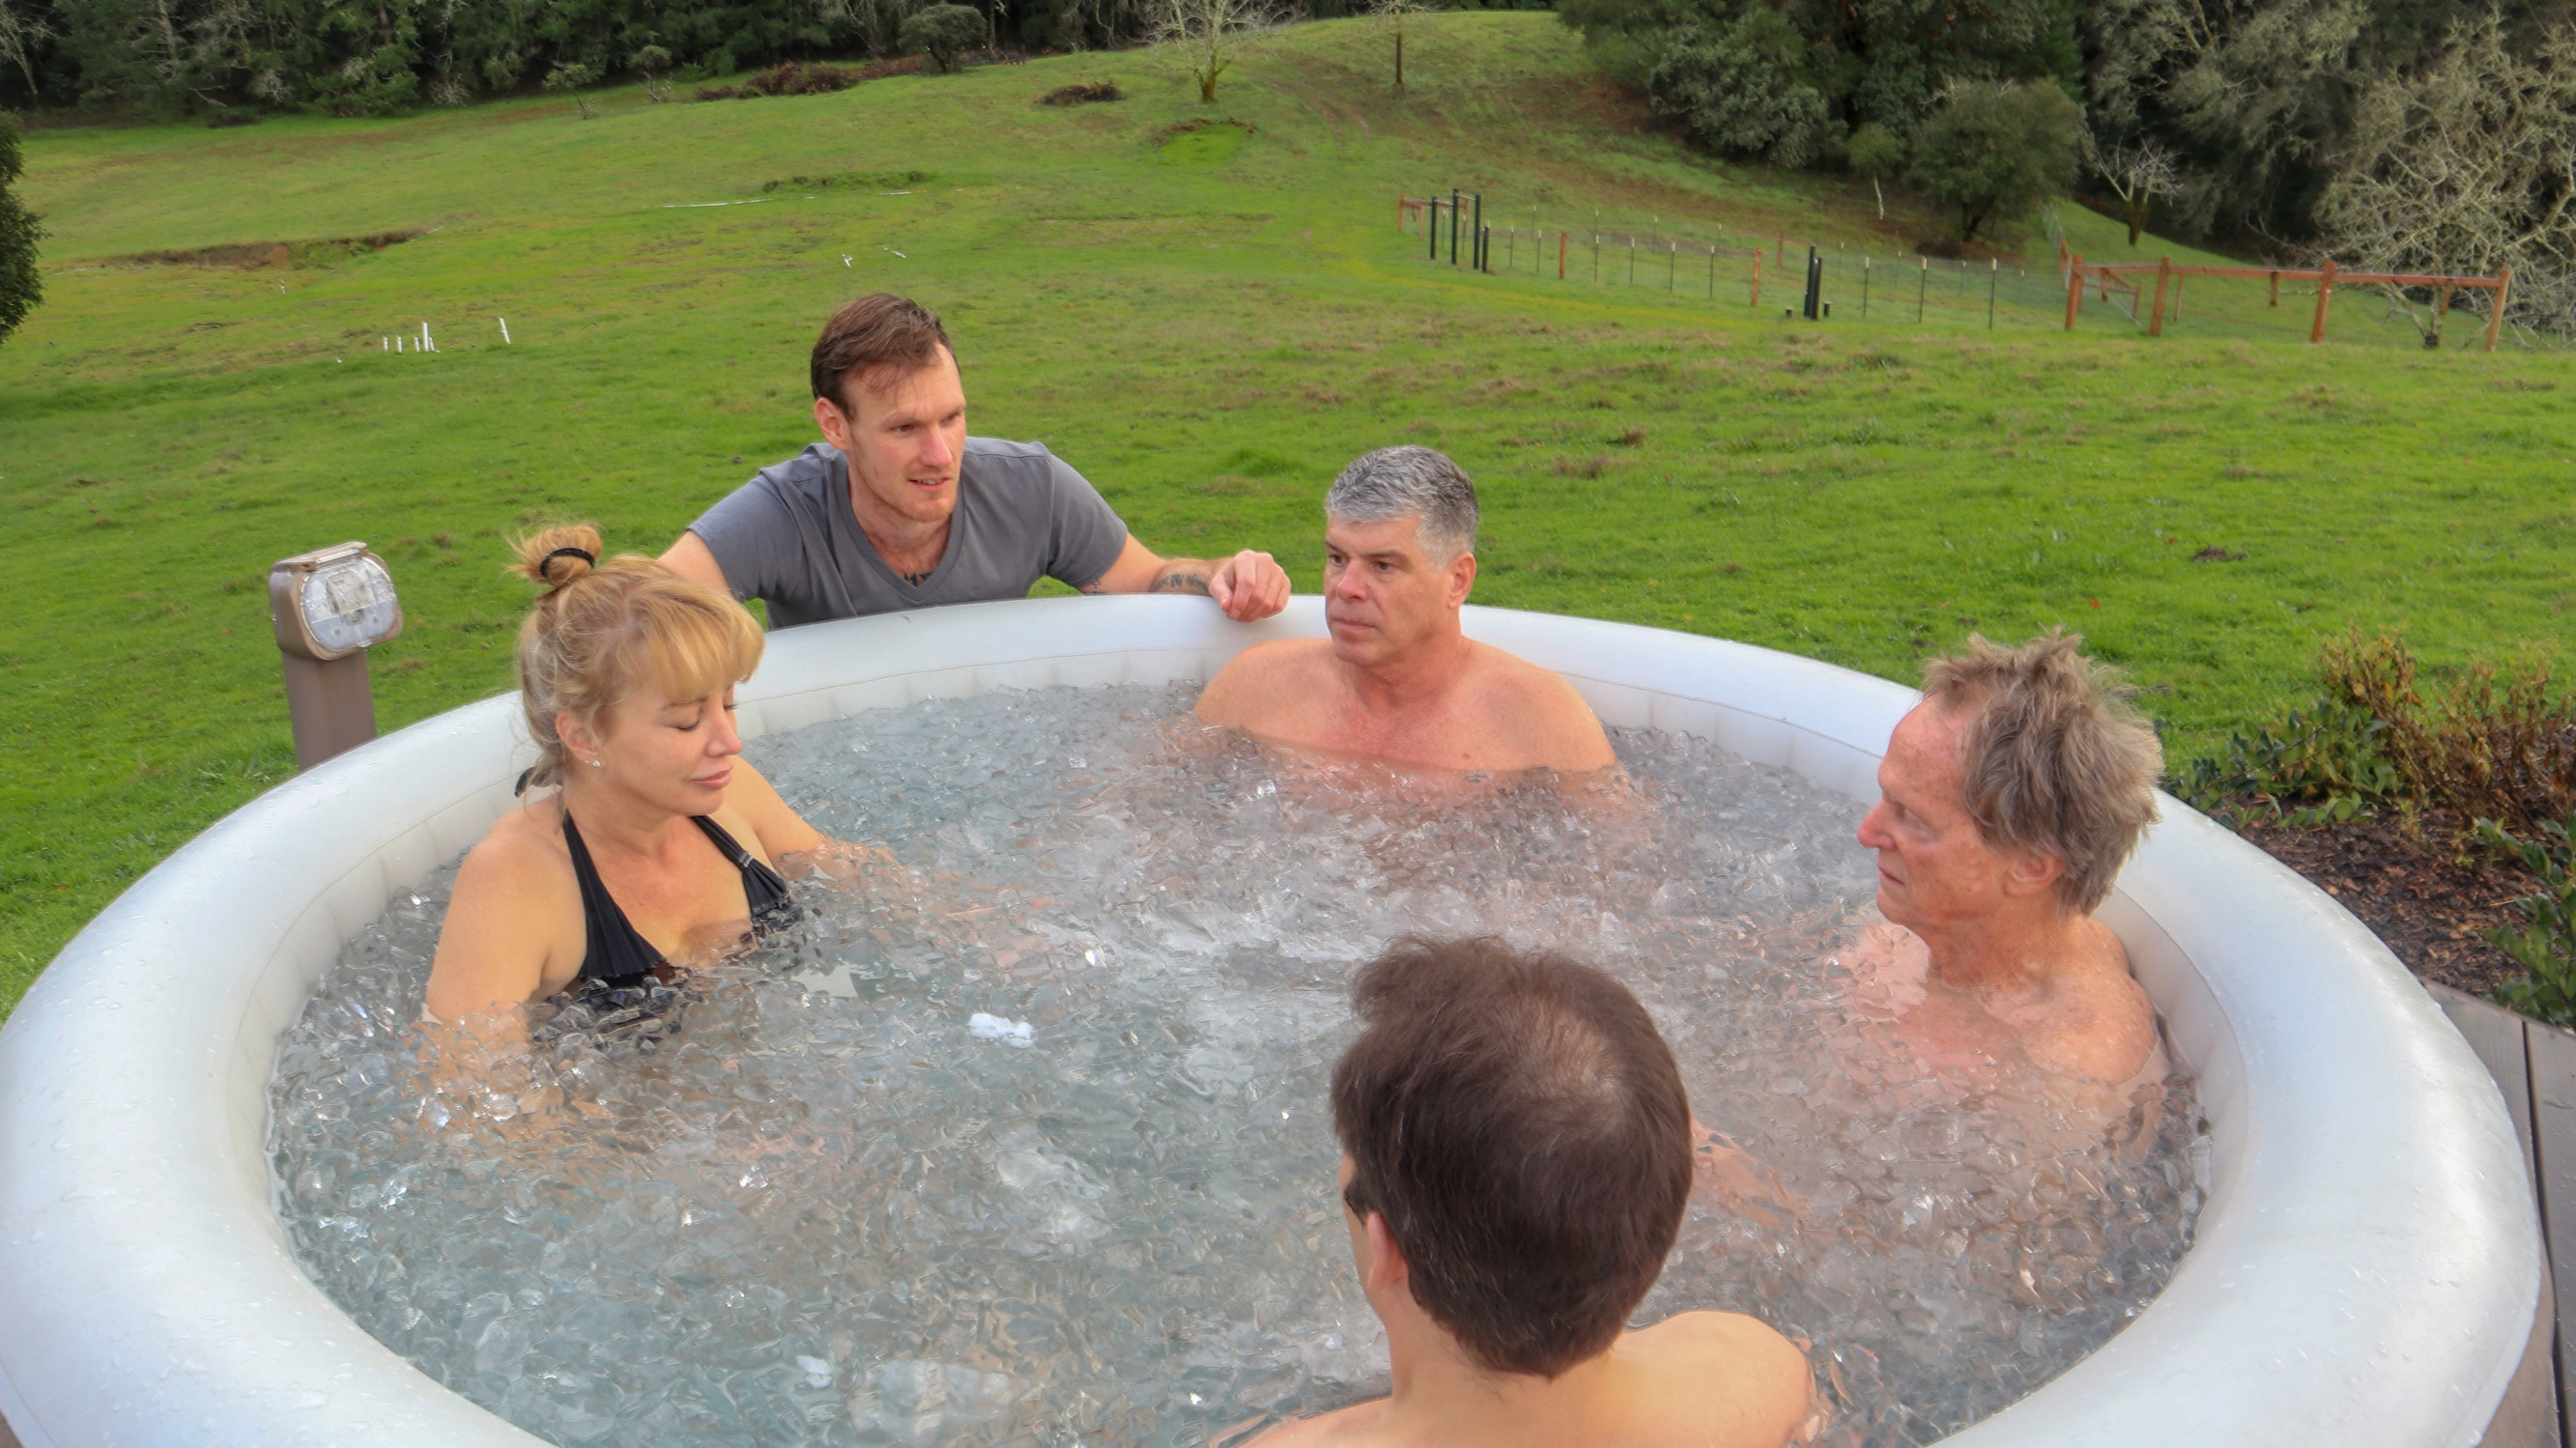 Image 6 of 6 - Experience the Wim Hof Method to get an impression of  at 